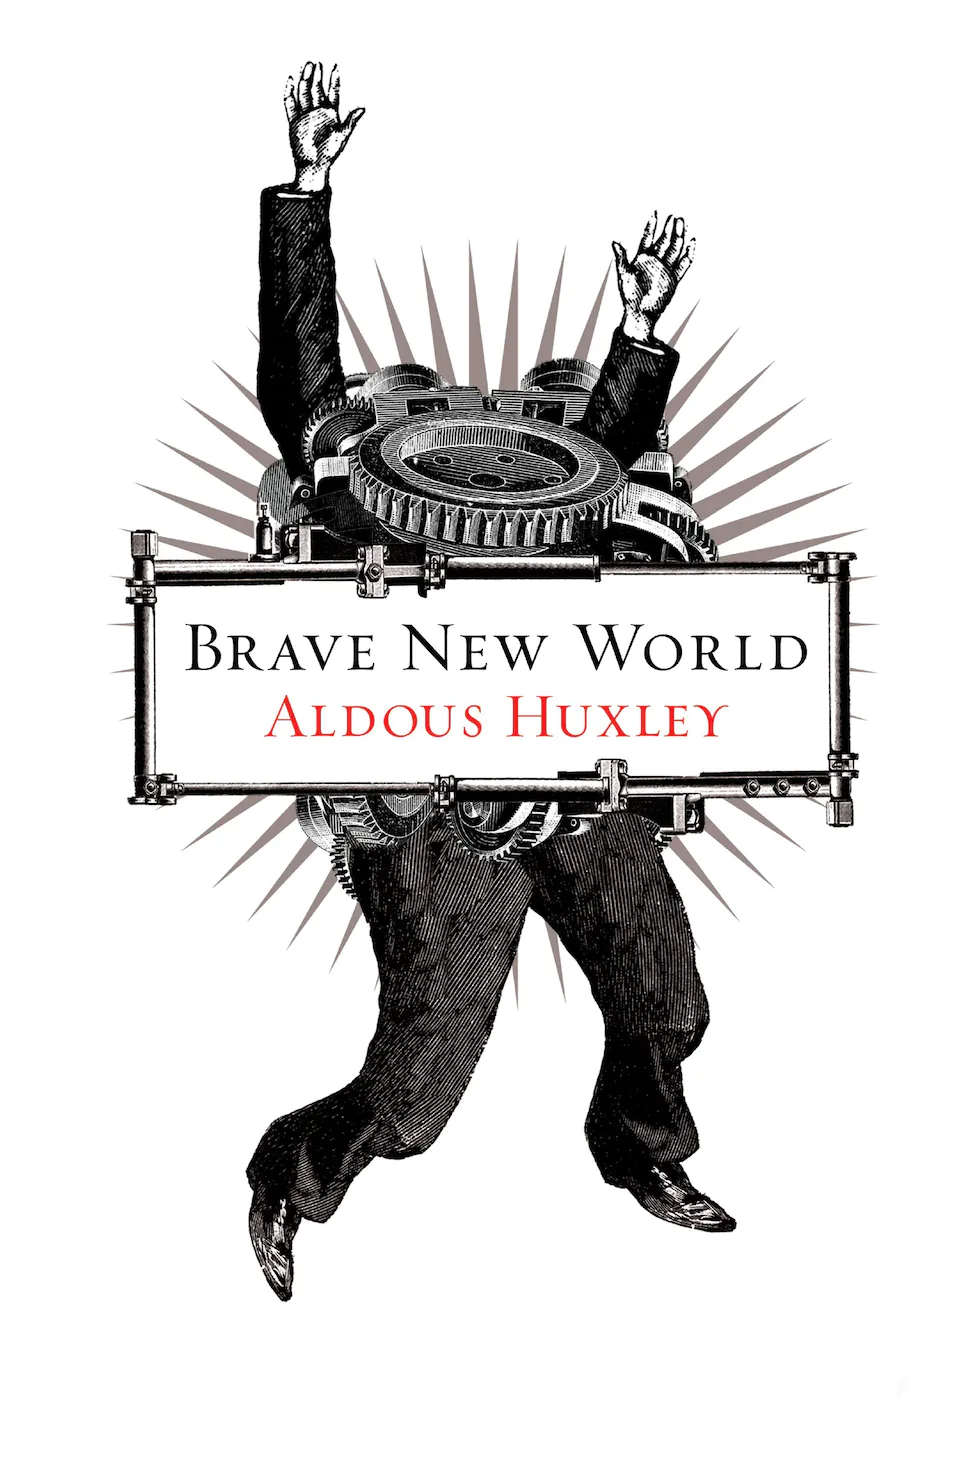 Brave New World by Aldous Huxley finished on 2022 Dec 21